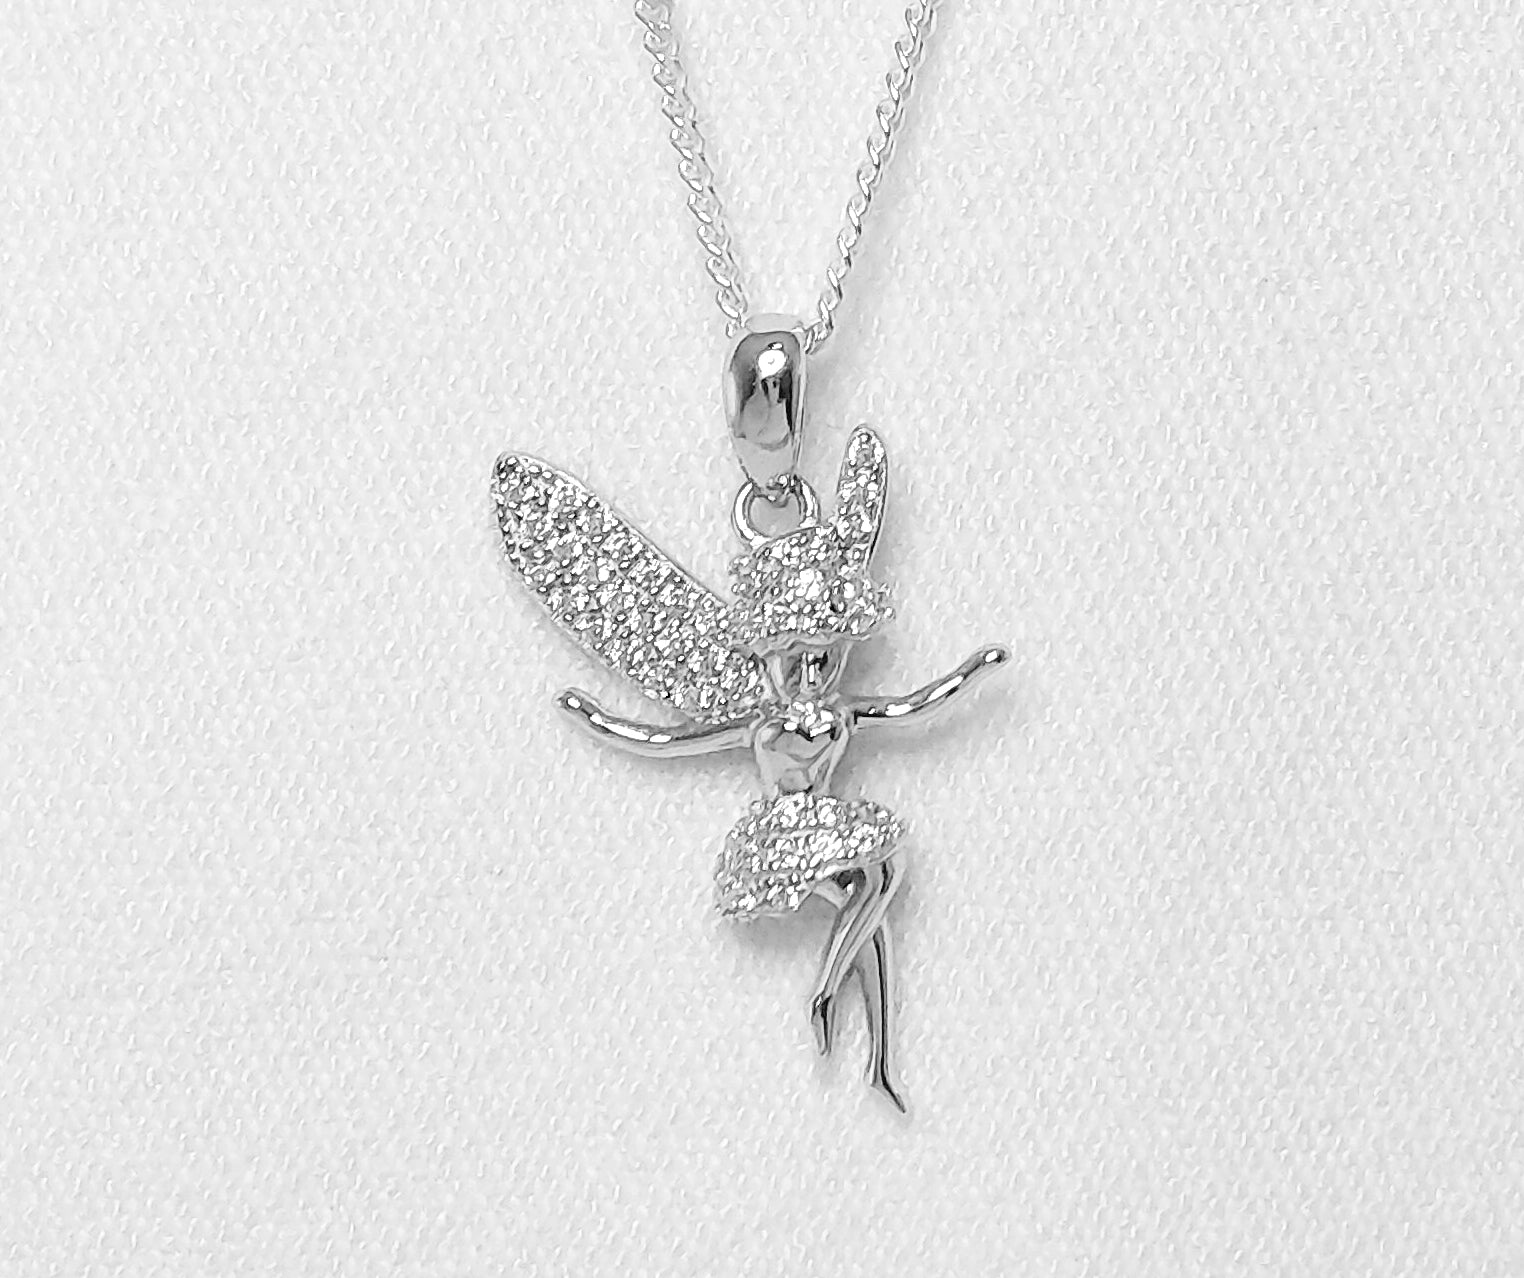 Sterling Silver Fairy Pendant with Cubic Zirconia Stones